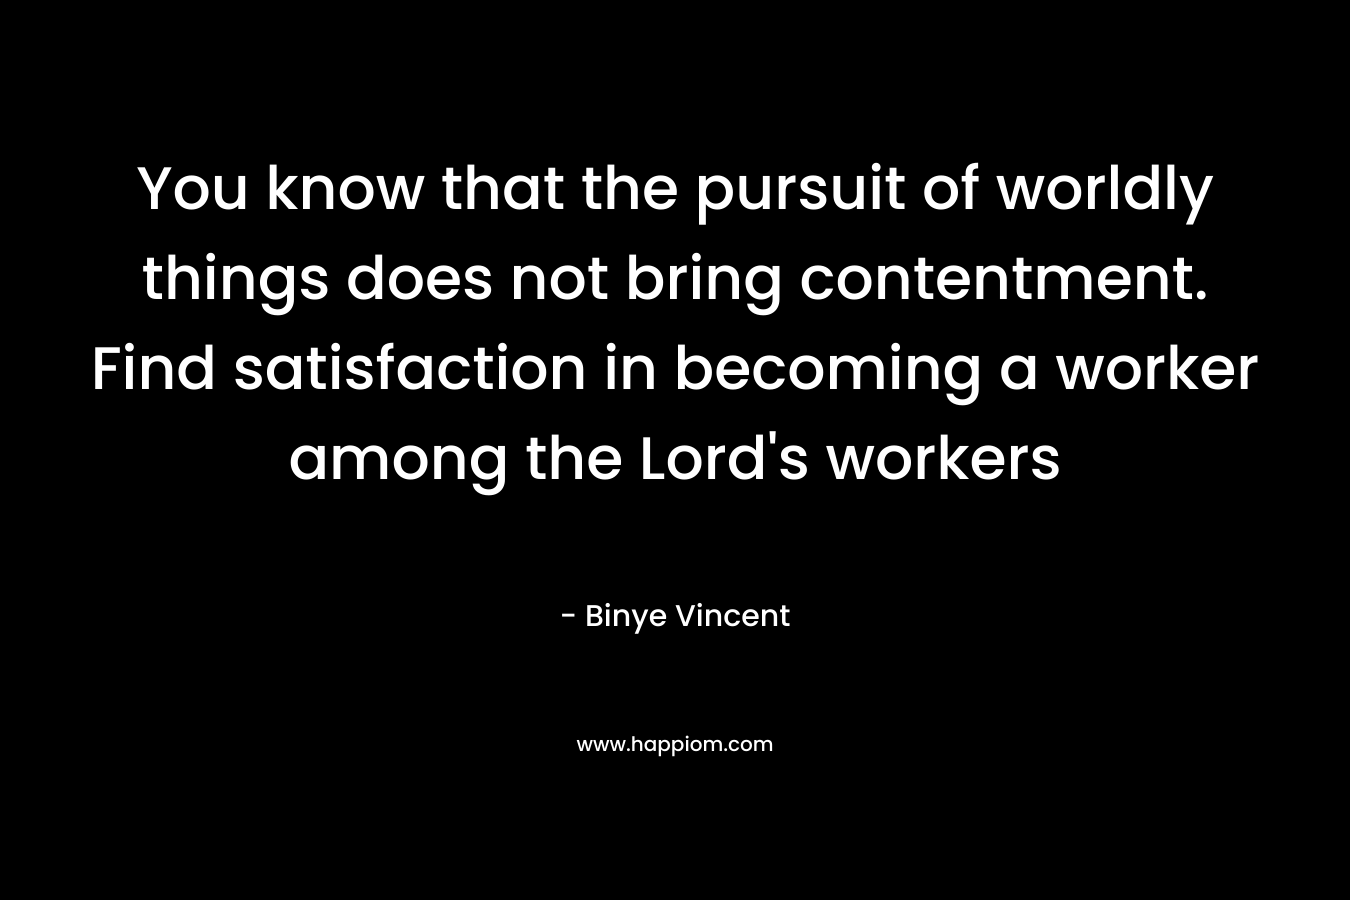 You know that the pursuit of worldly things does not bring contentment. Find satisfaction in becoming a worker among the Lord's workers